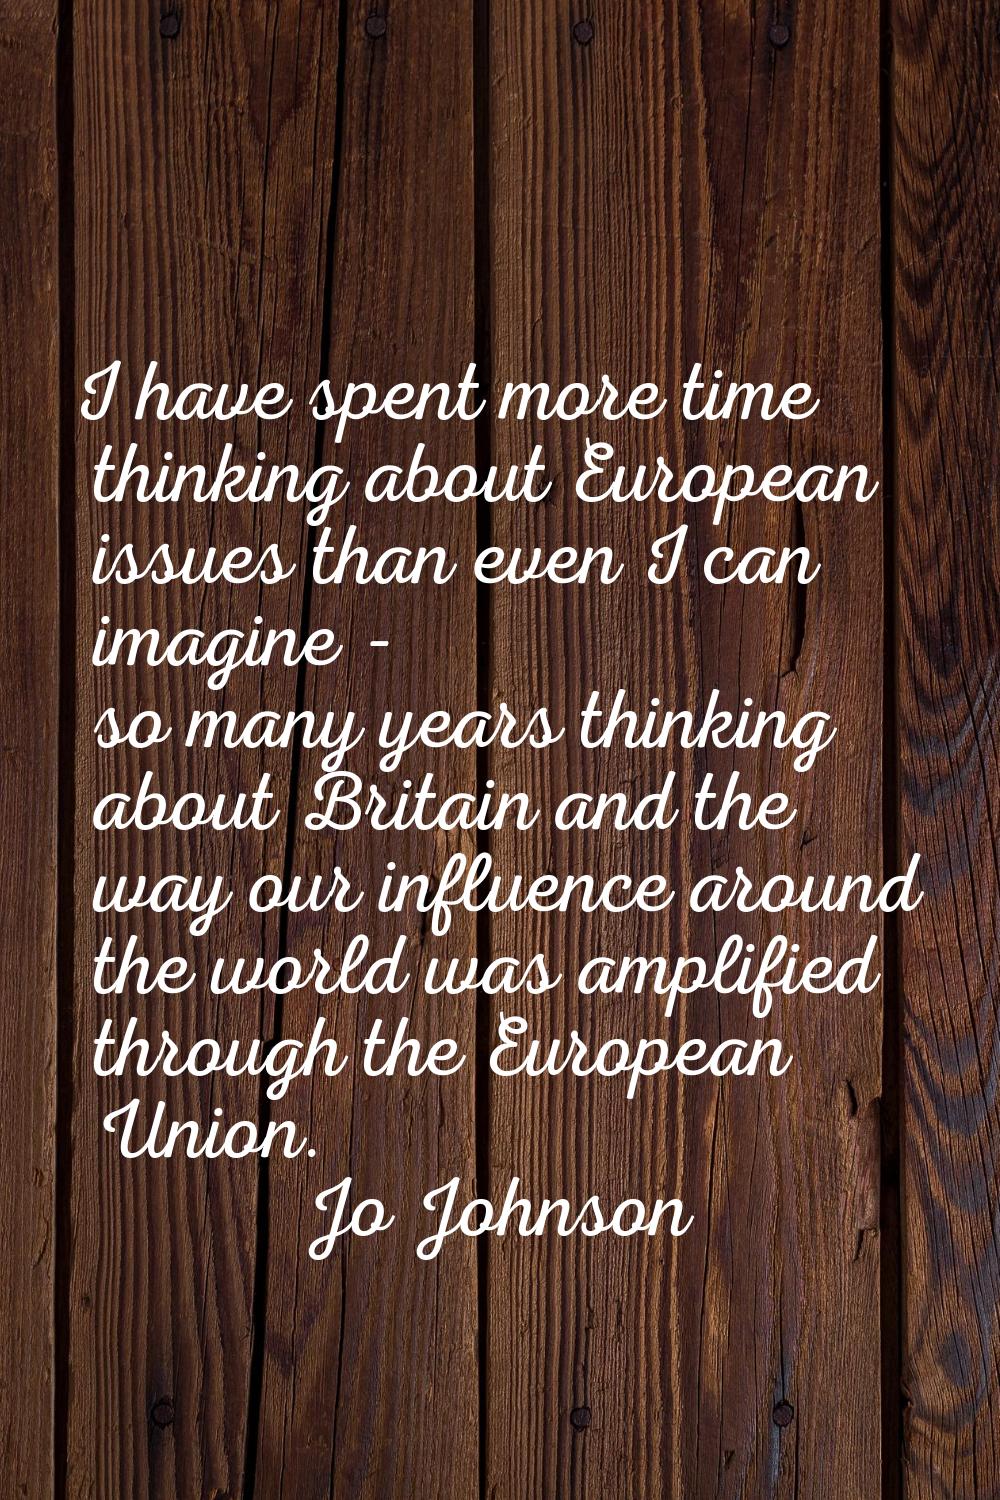 I have spent more time thinking about European issues than even I can imagine - so many years think